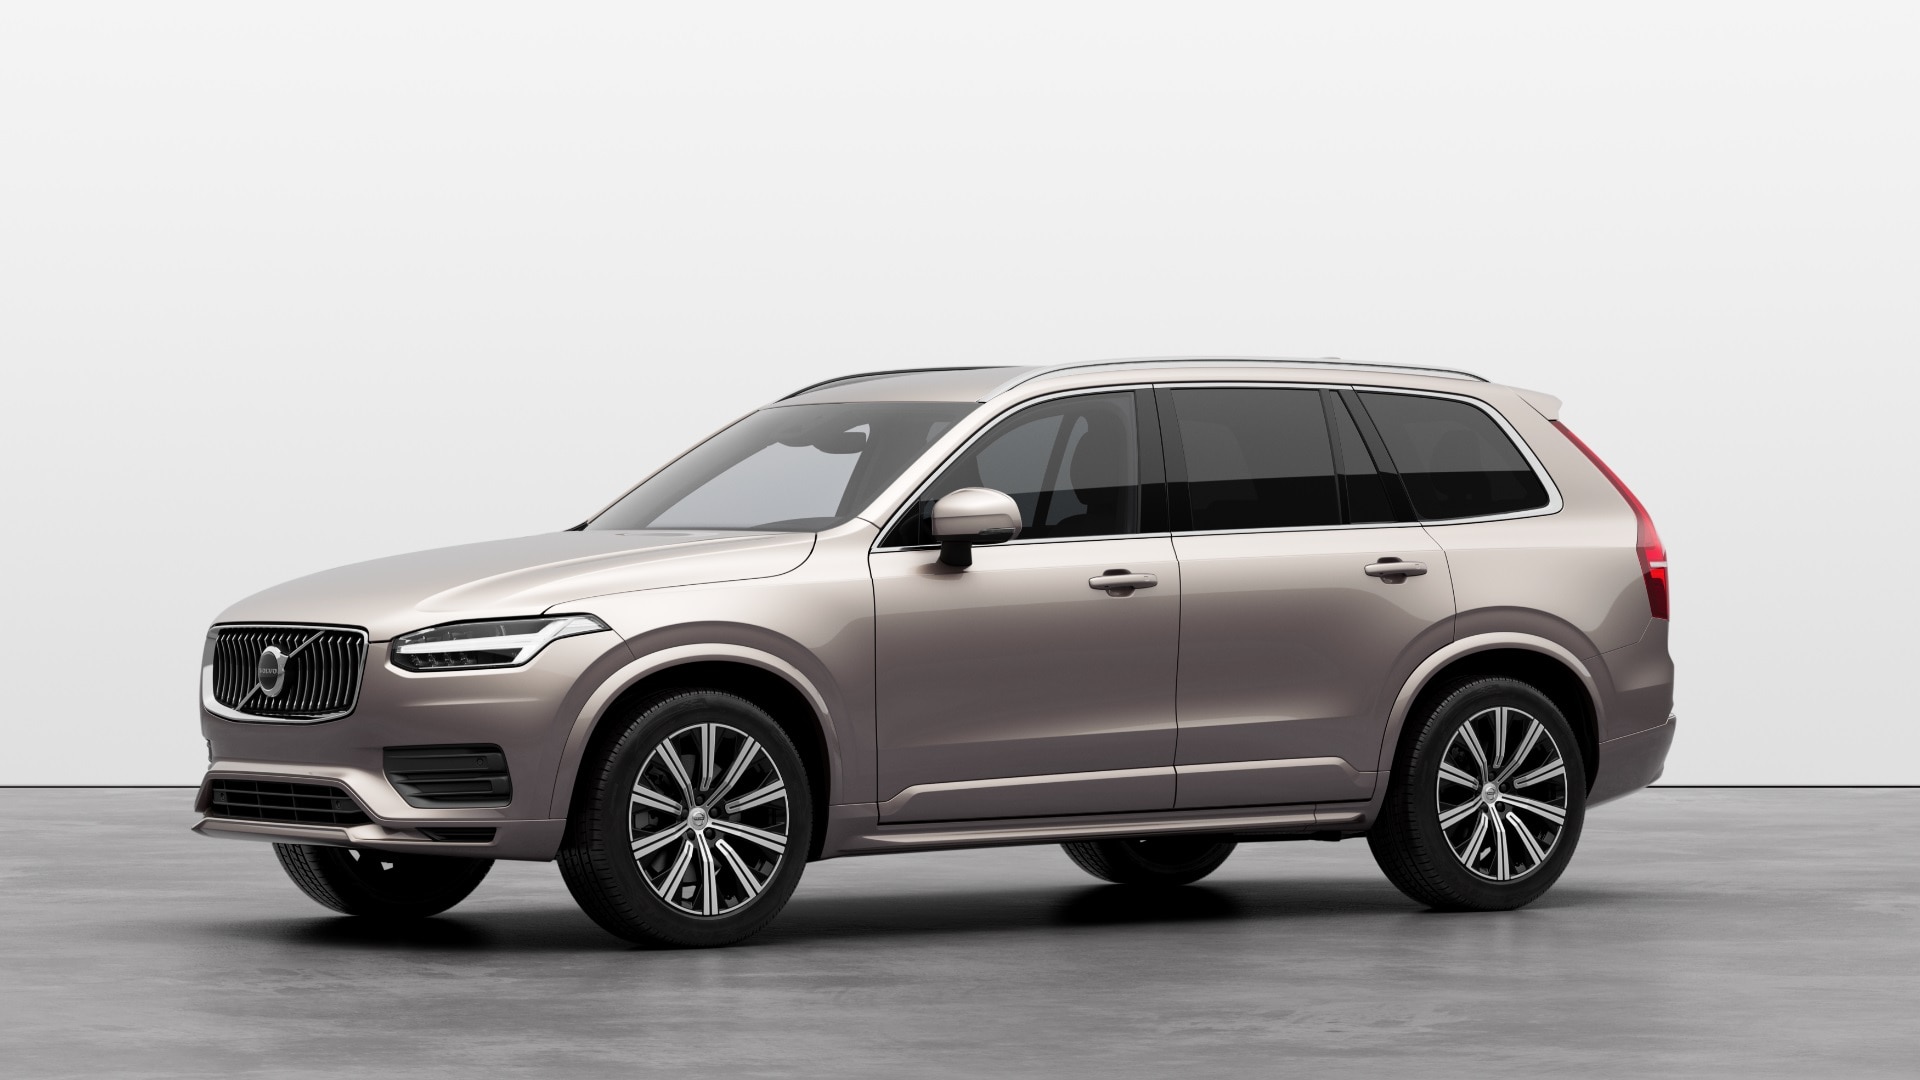  VOLVO XC90 2.0 B5P [250] Core 5dr AWD Geartronic